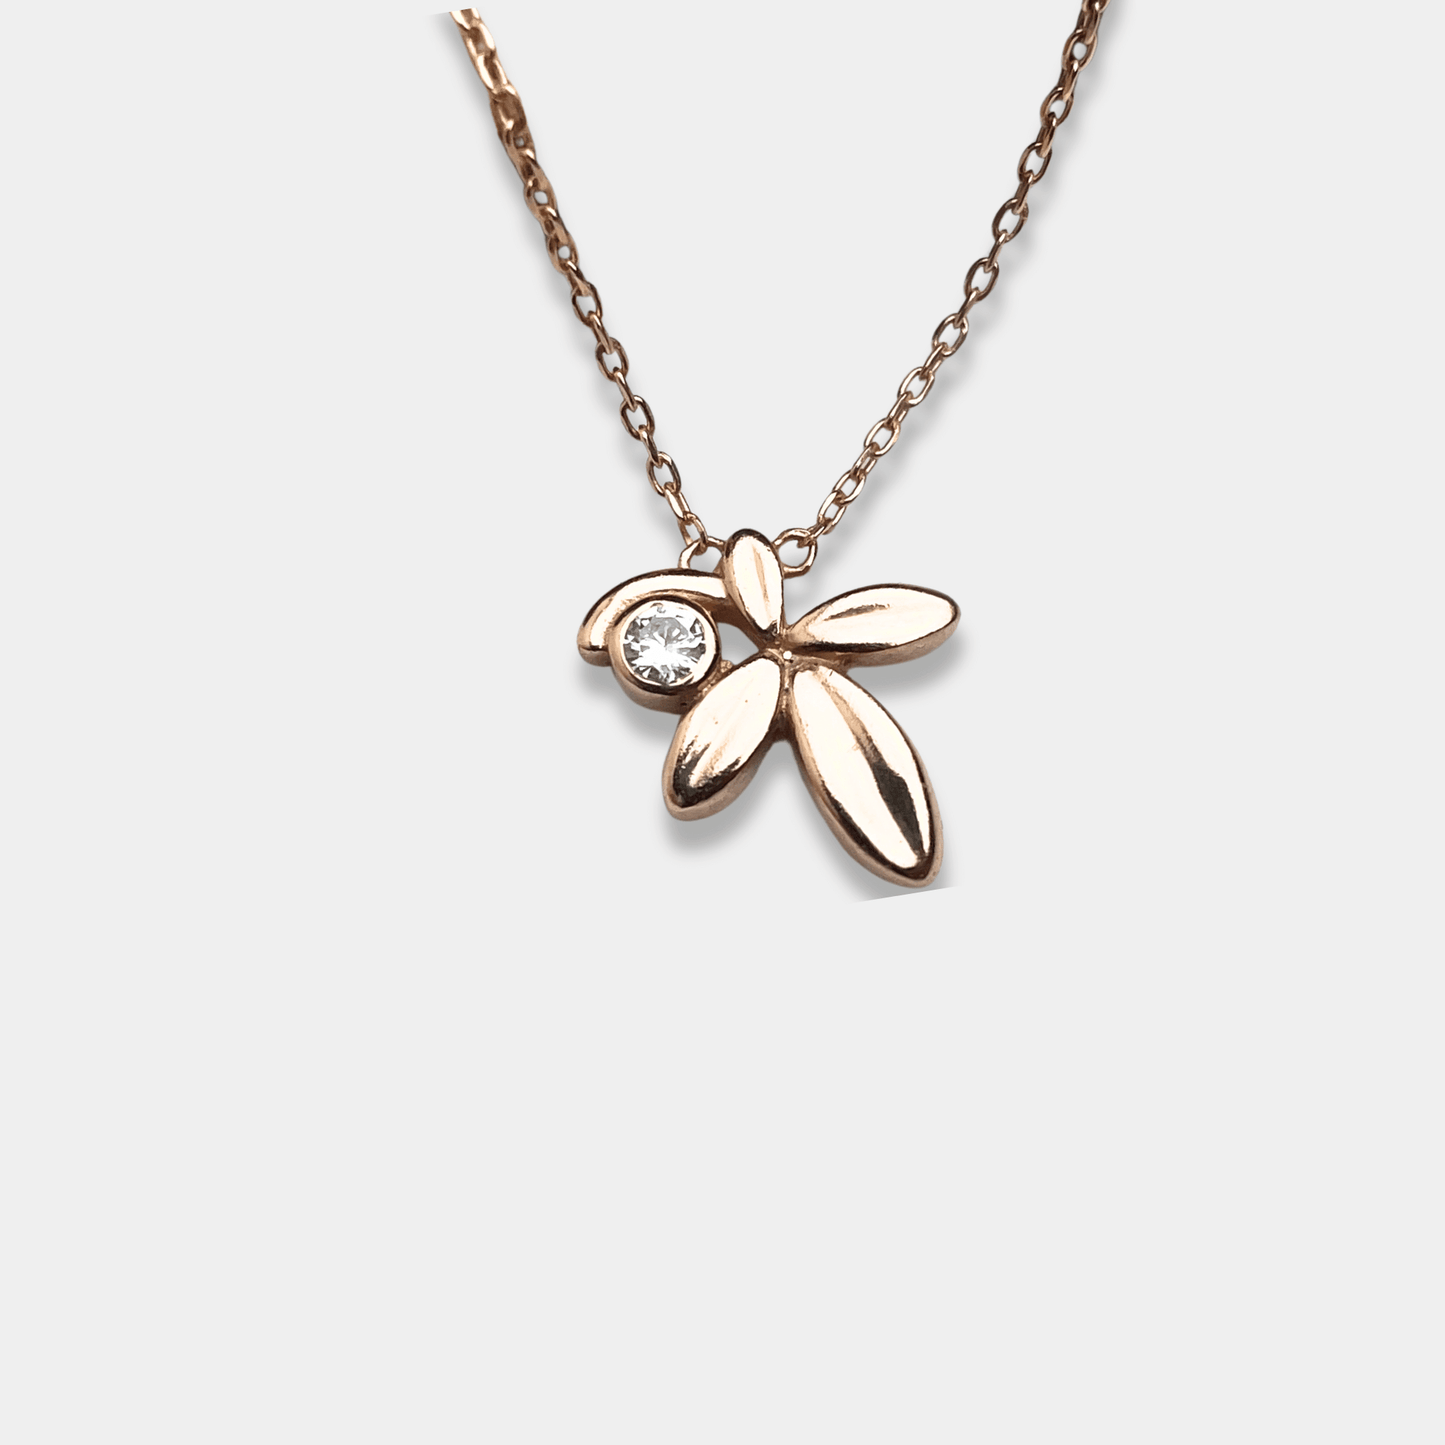 A dainty silver necklace featuring a charming flower pendant. Perfect for adding a touch of elegance to any outfit.